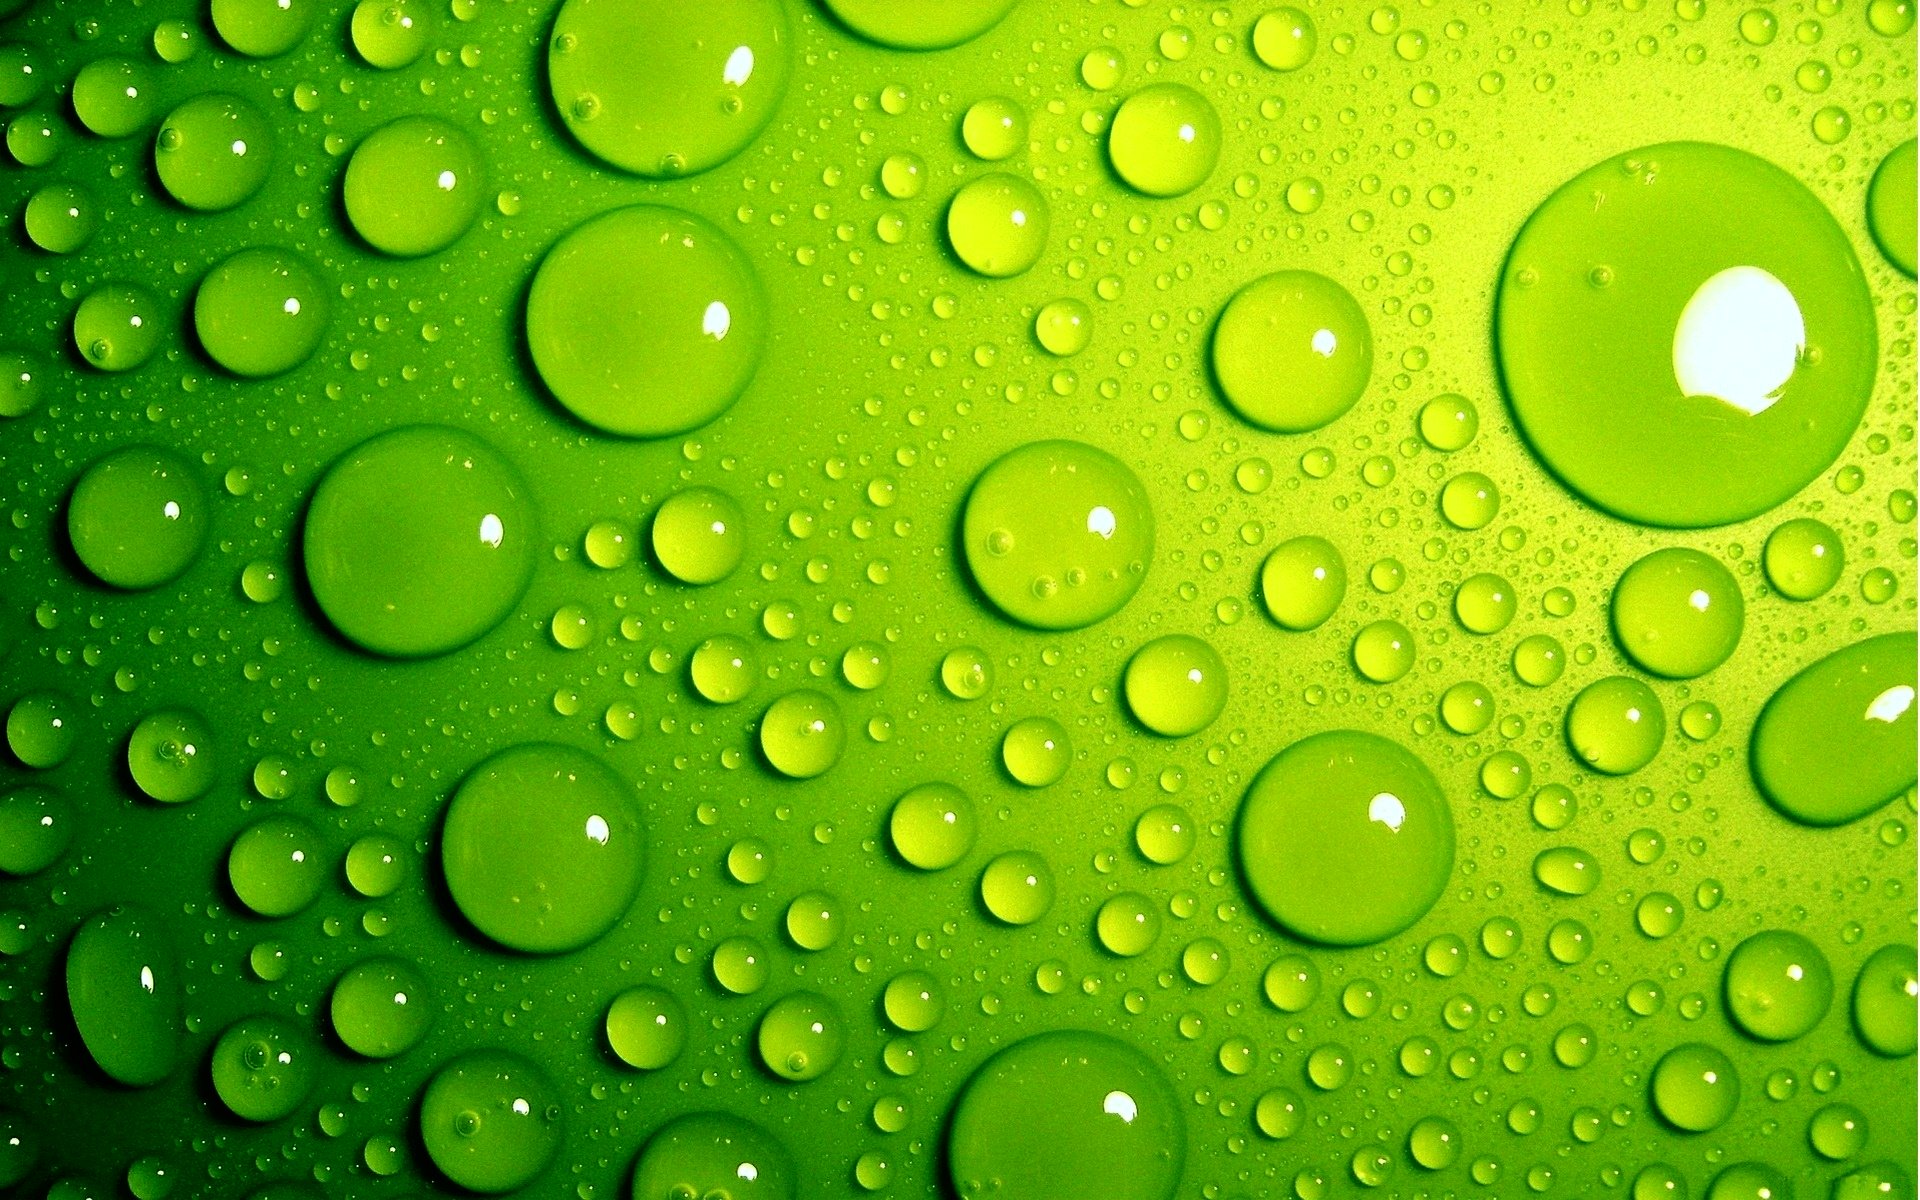 HD Green Wallpaper For Windows And Mac Systems